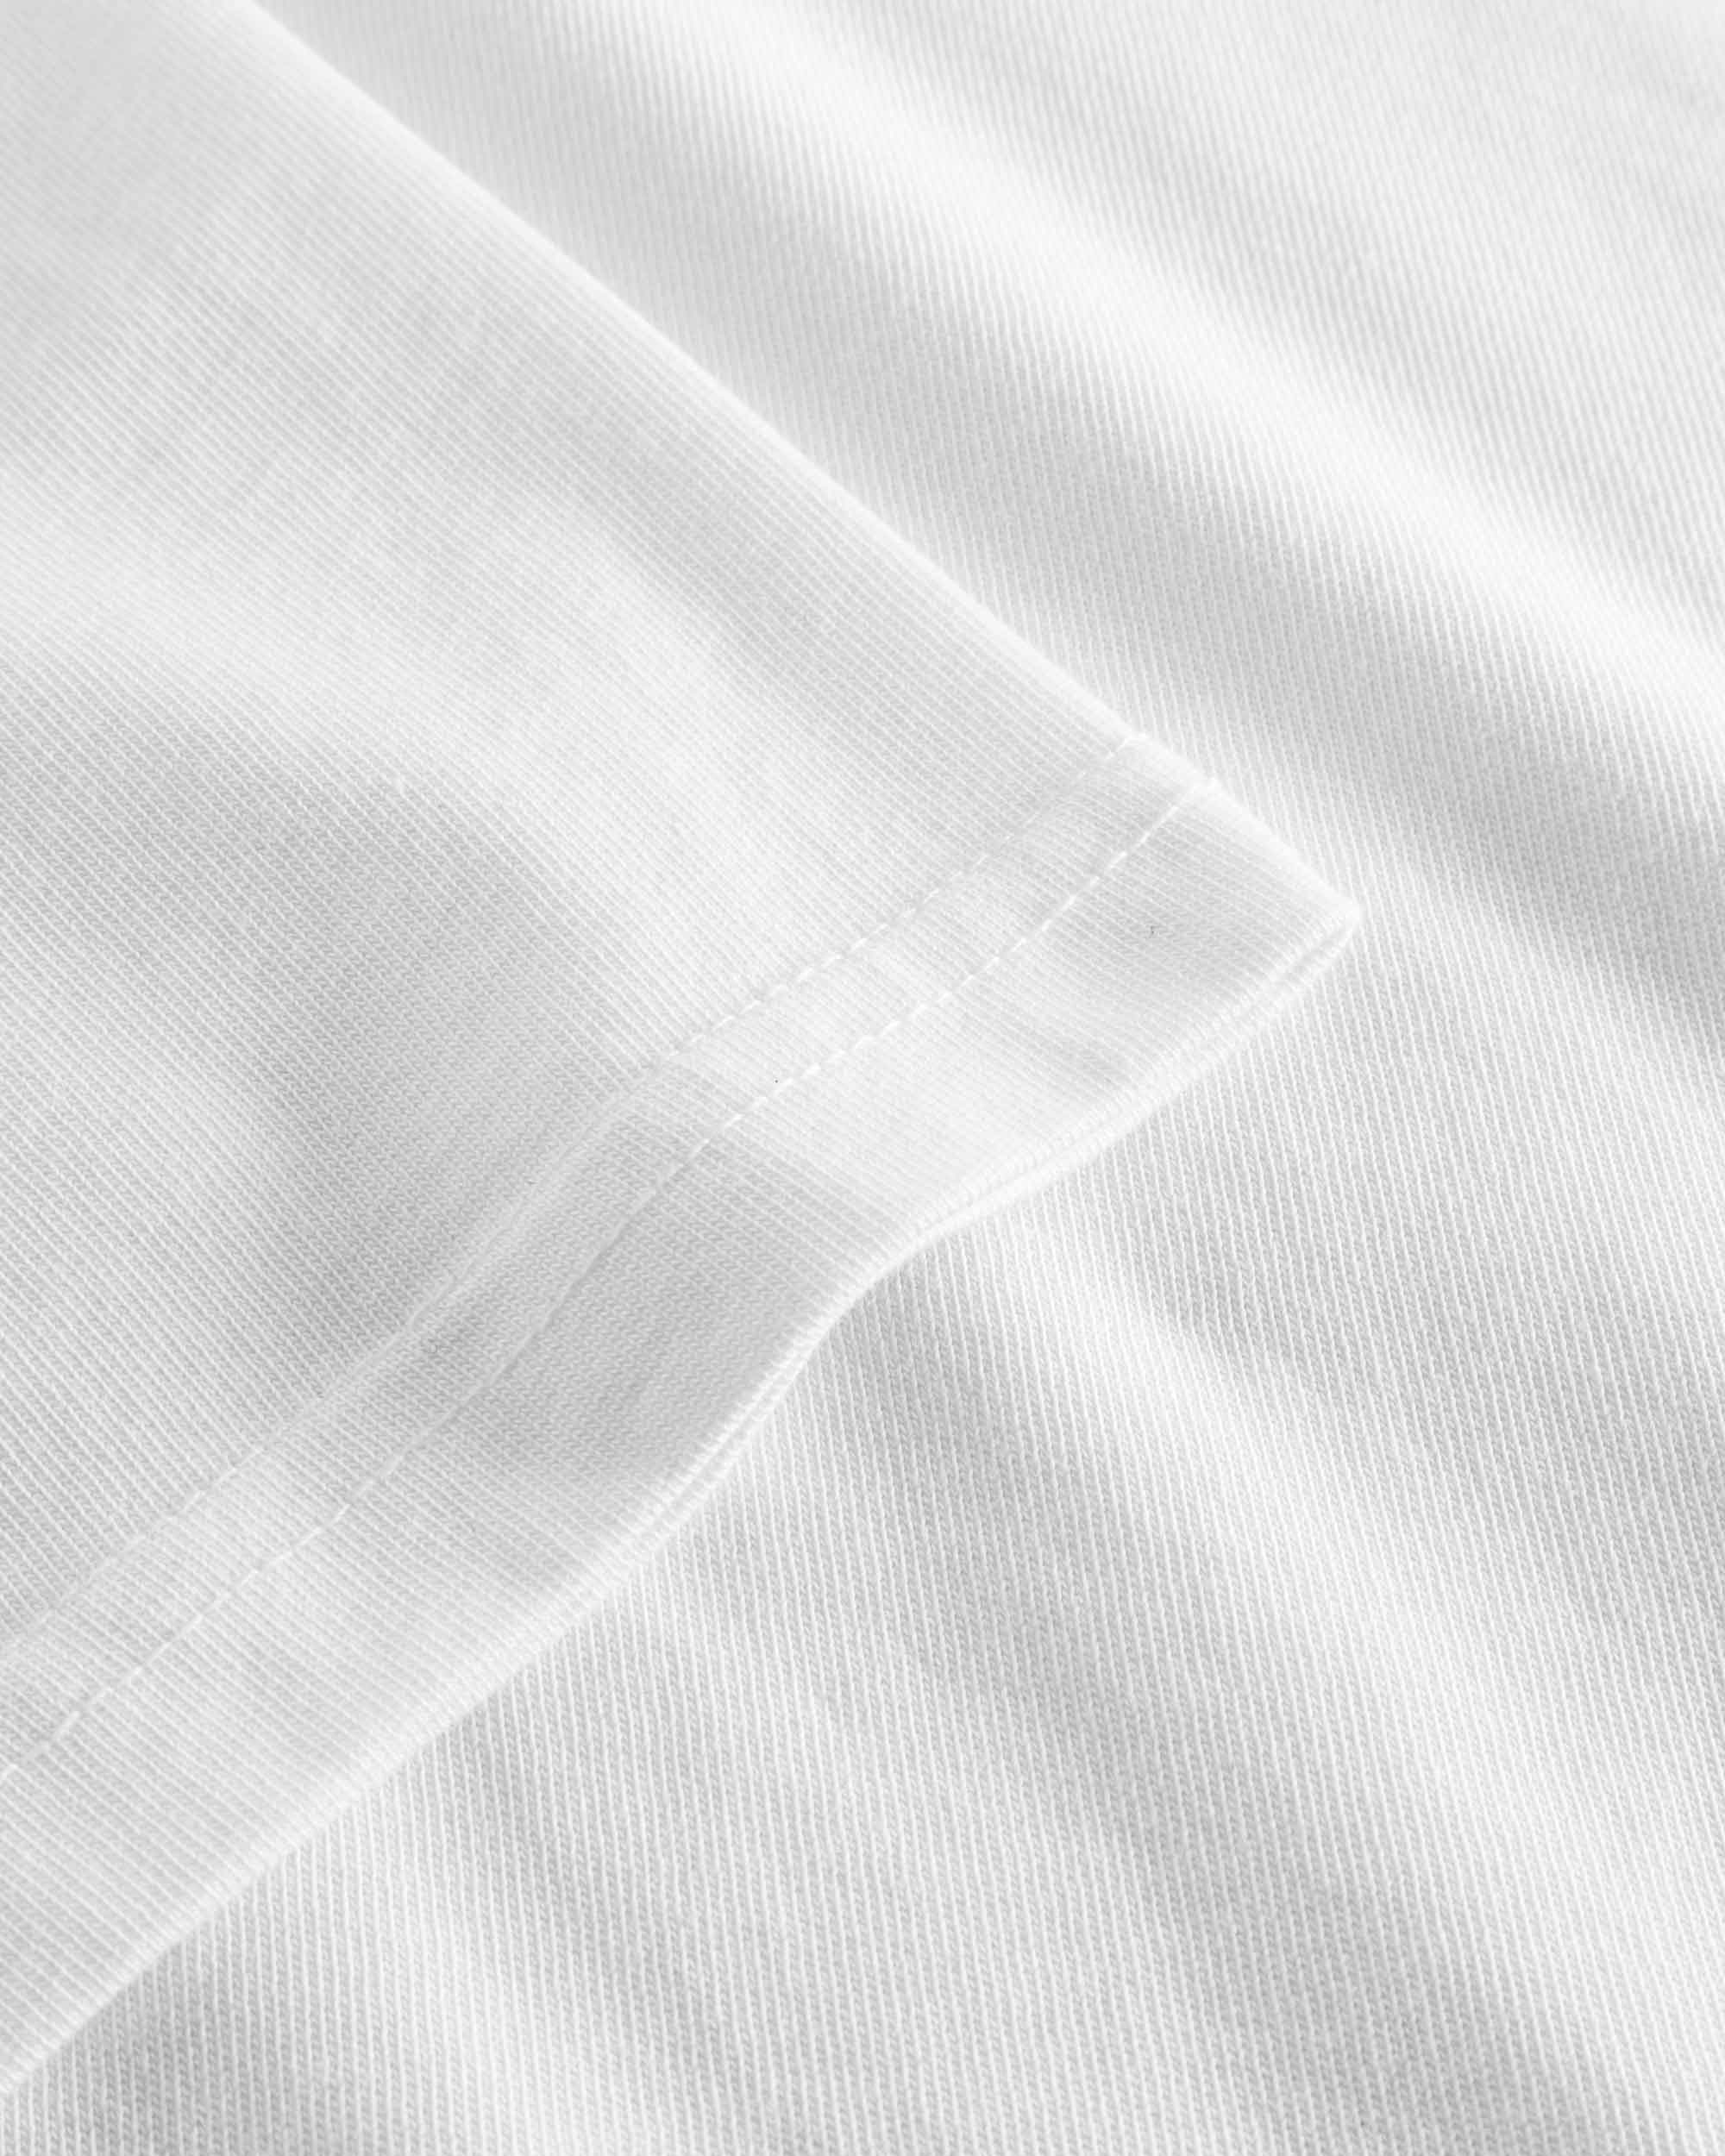 Close-up of sleeve and stitching on white t-shirt